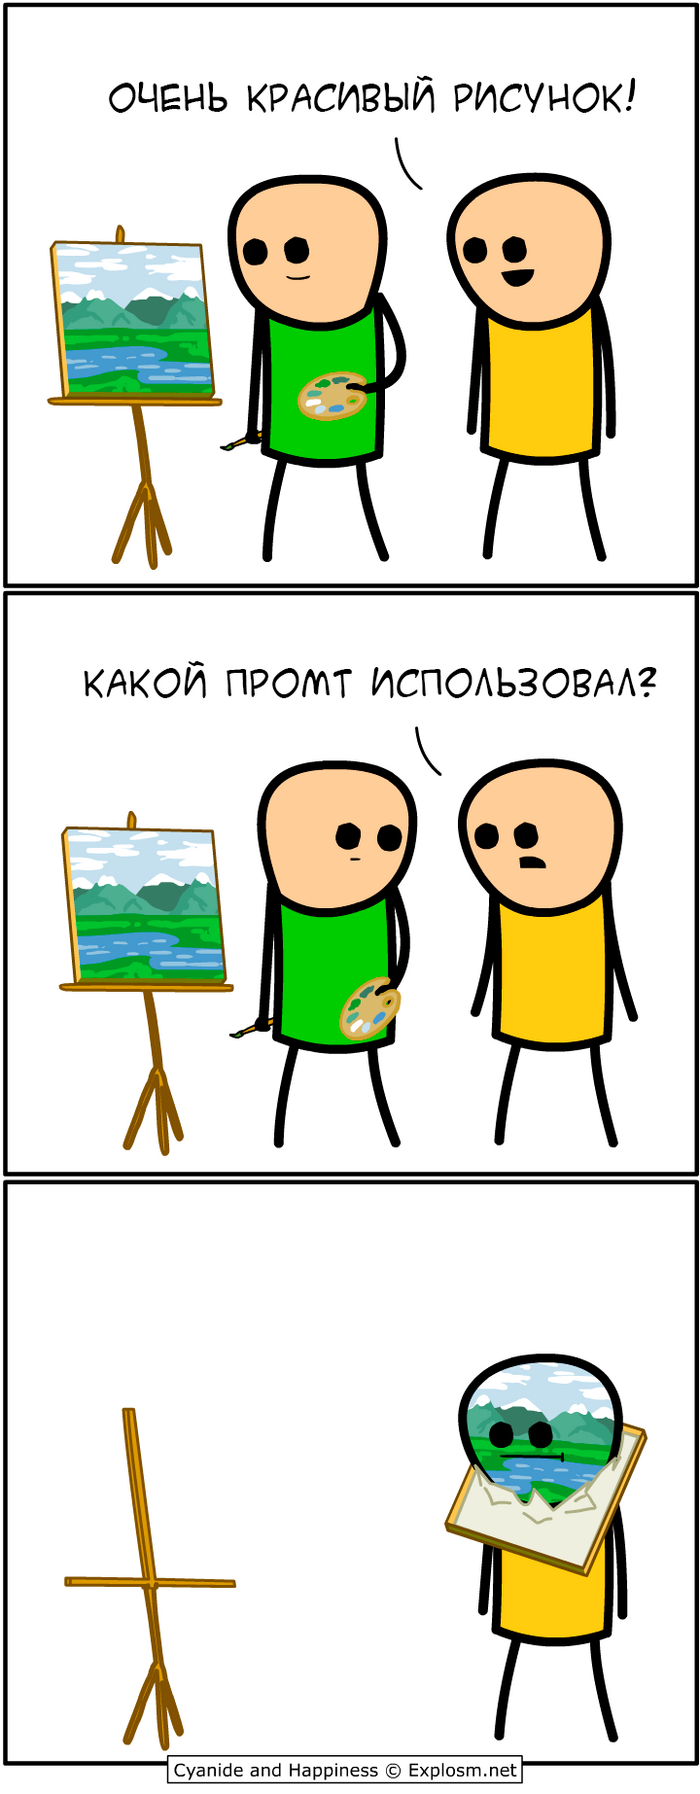  ,  , Cyanide and Happiness, ,  , 